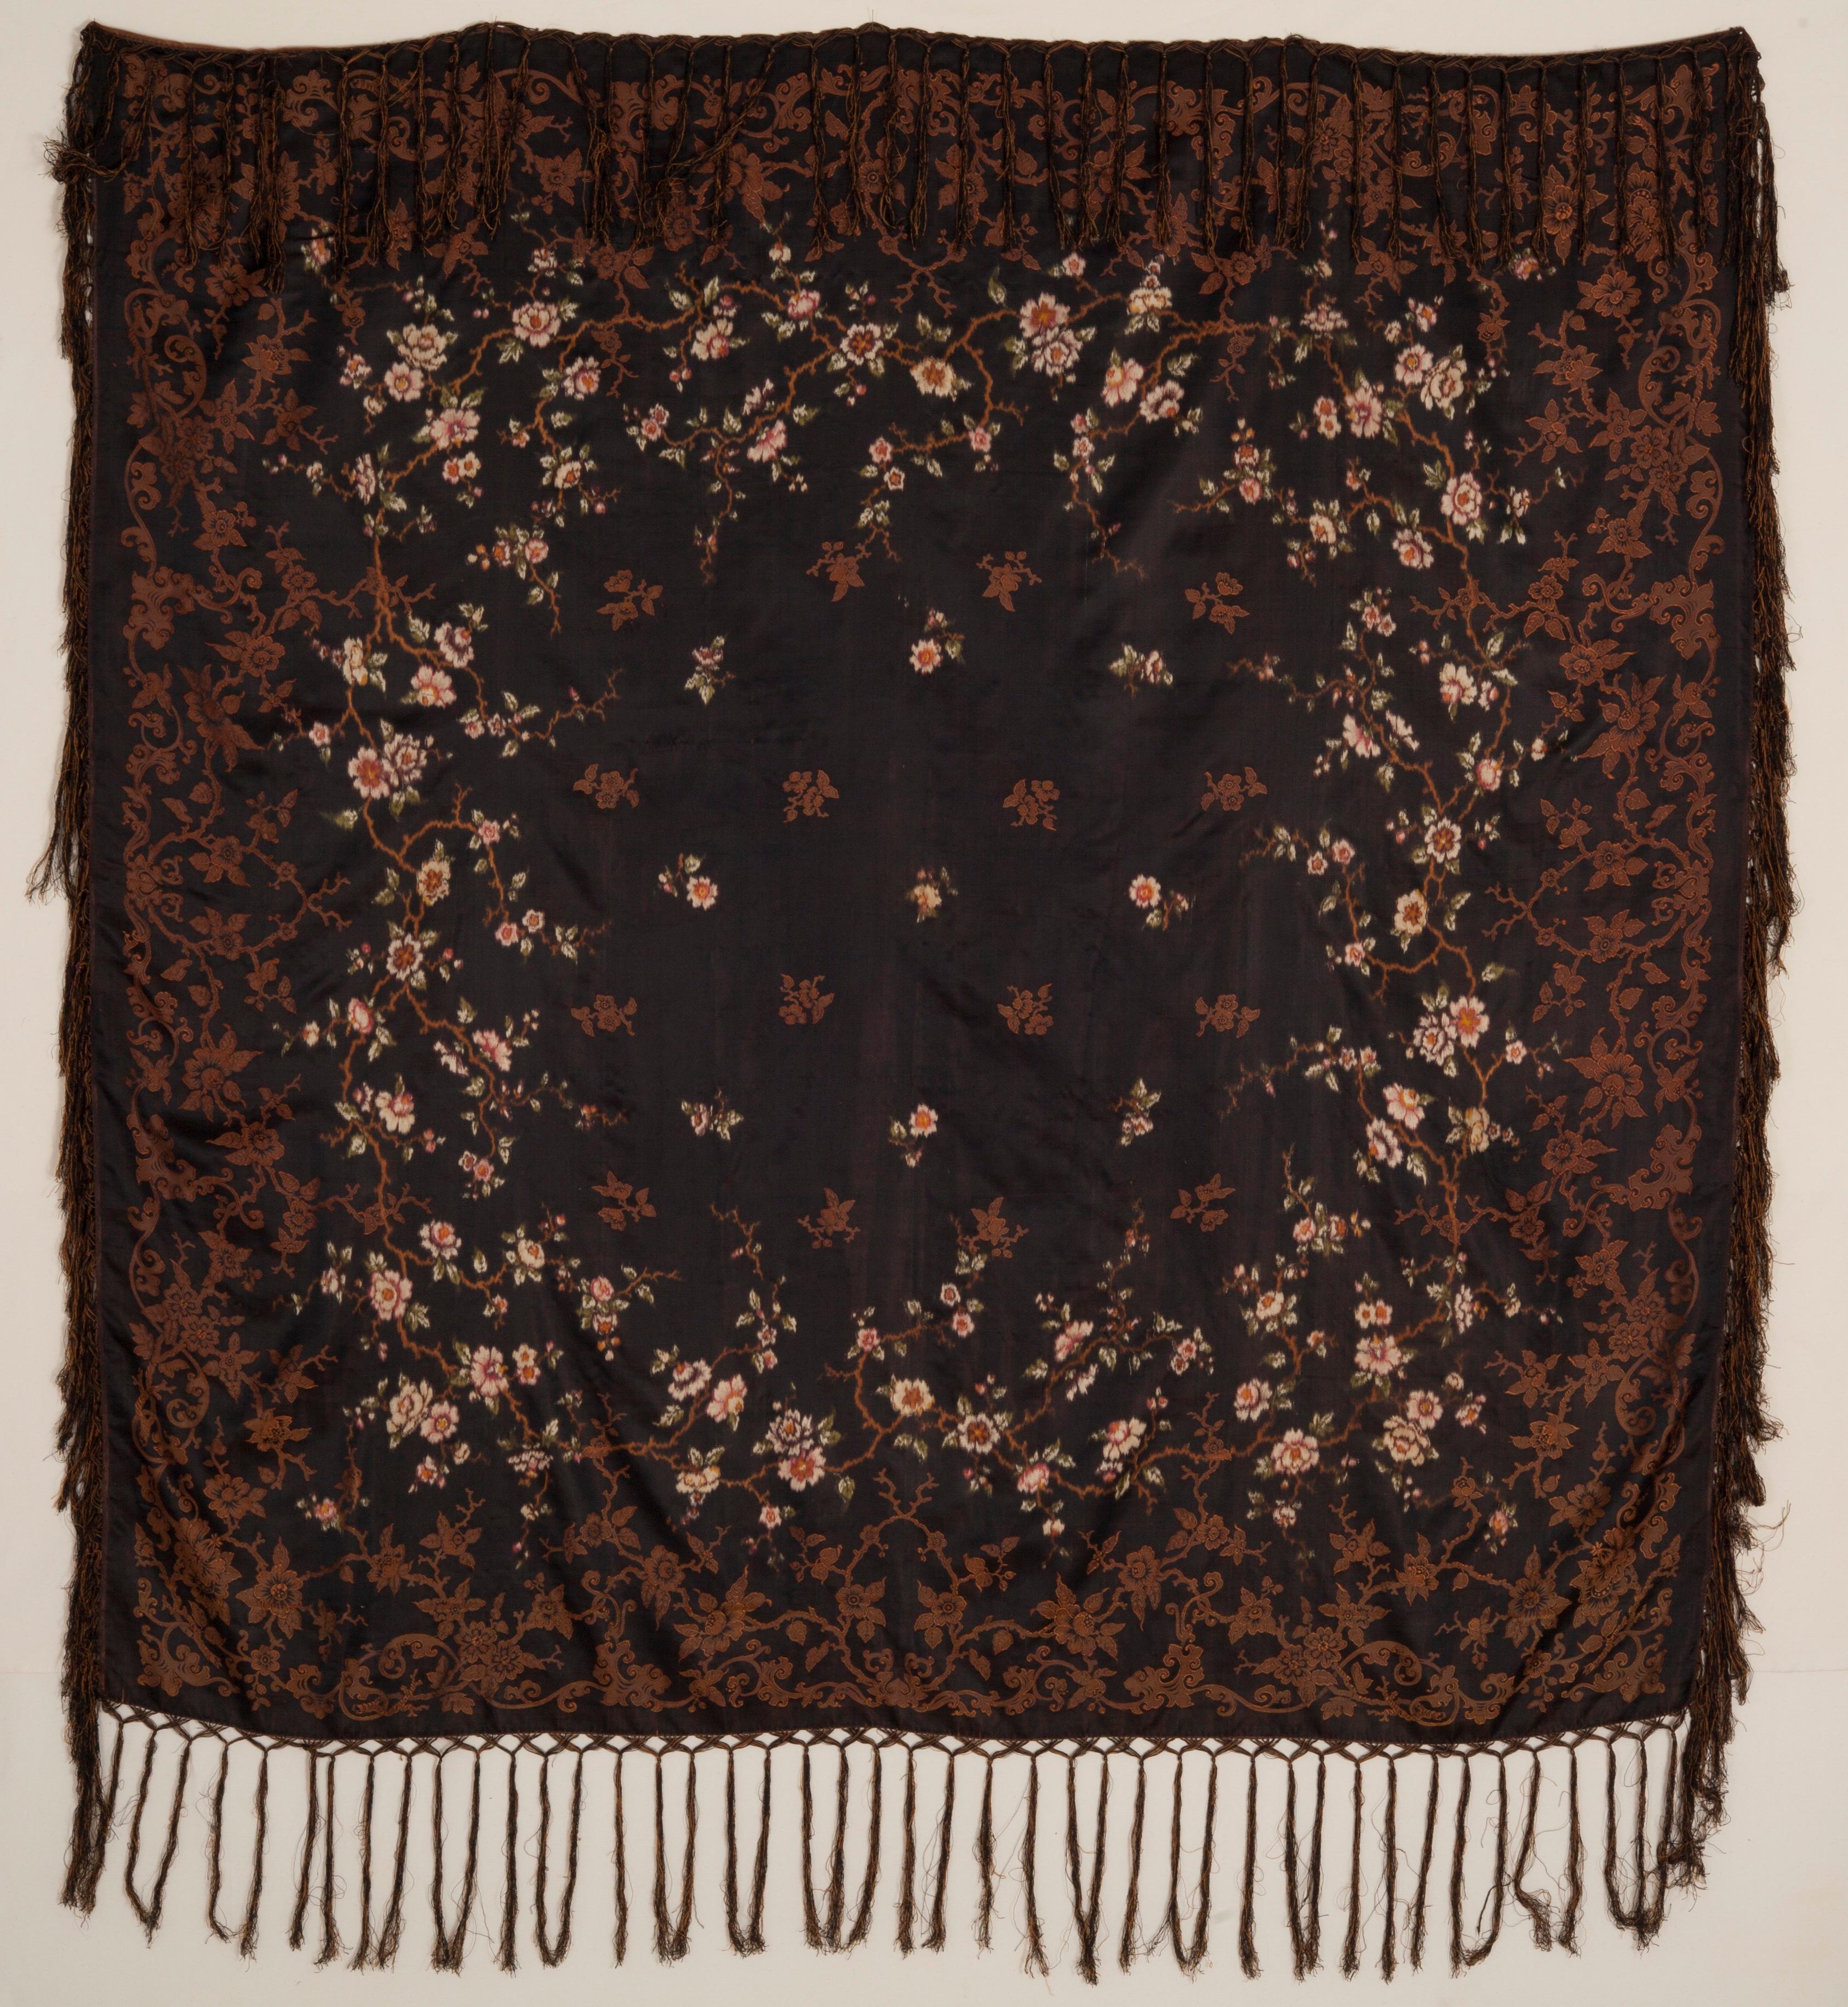 Rococo Revival Mid-19th Century French Silk Chiné Shawl For Sale